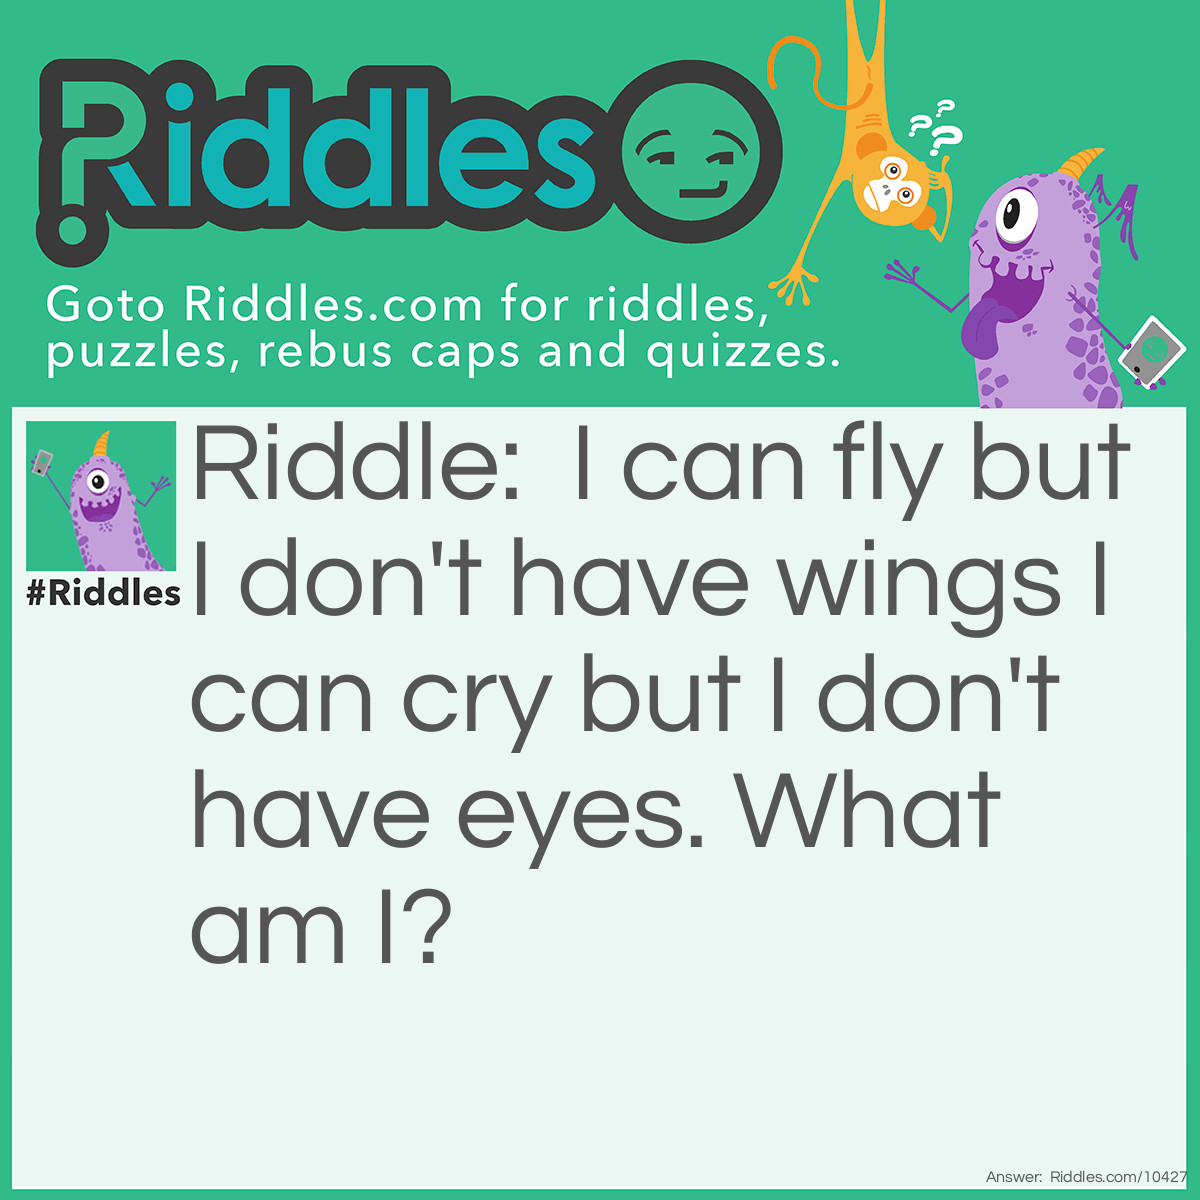 Riddle: I can fly but I don't have wings I can cry but I don't have eyes. What am I? Answer: Cloud.